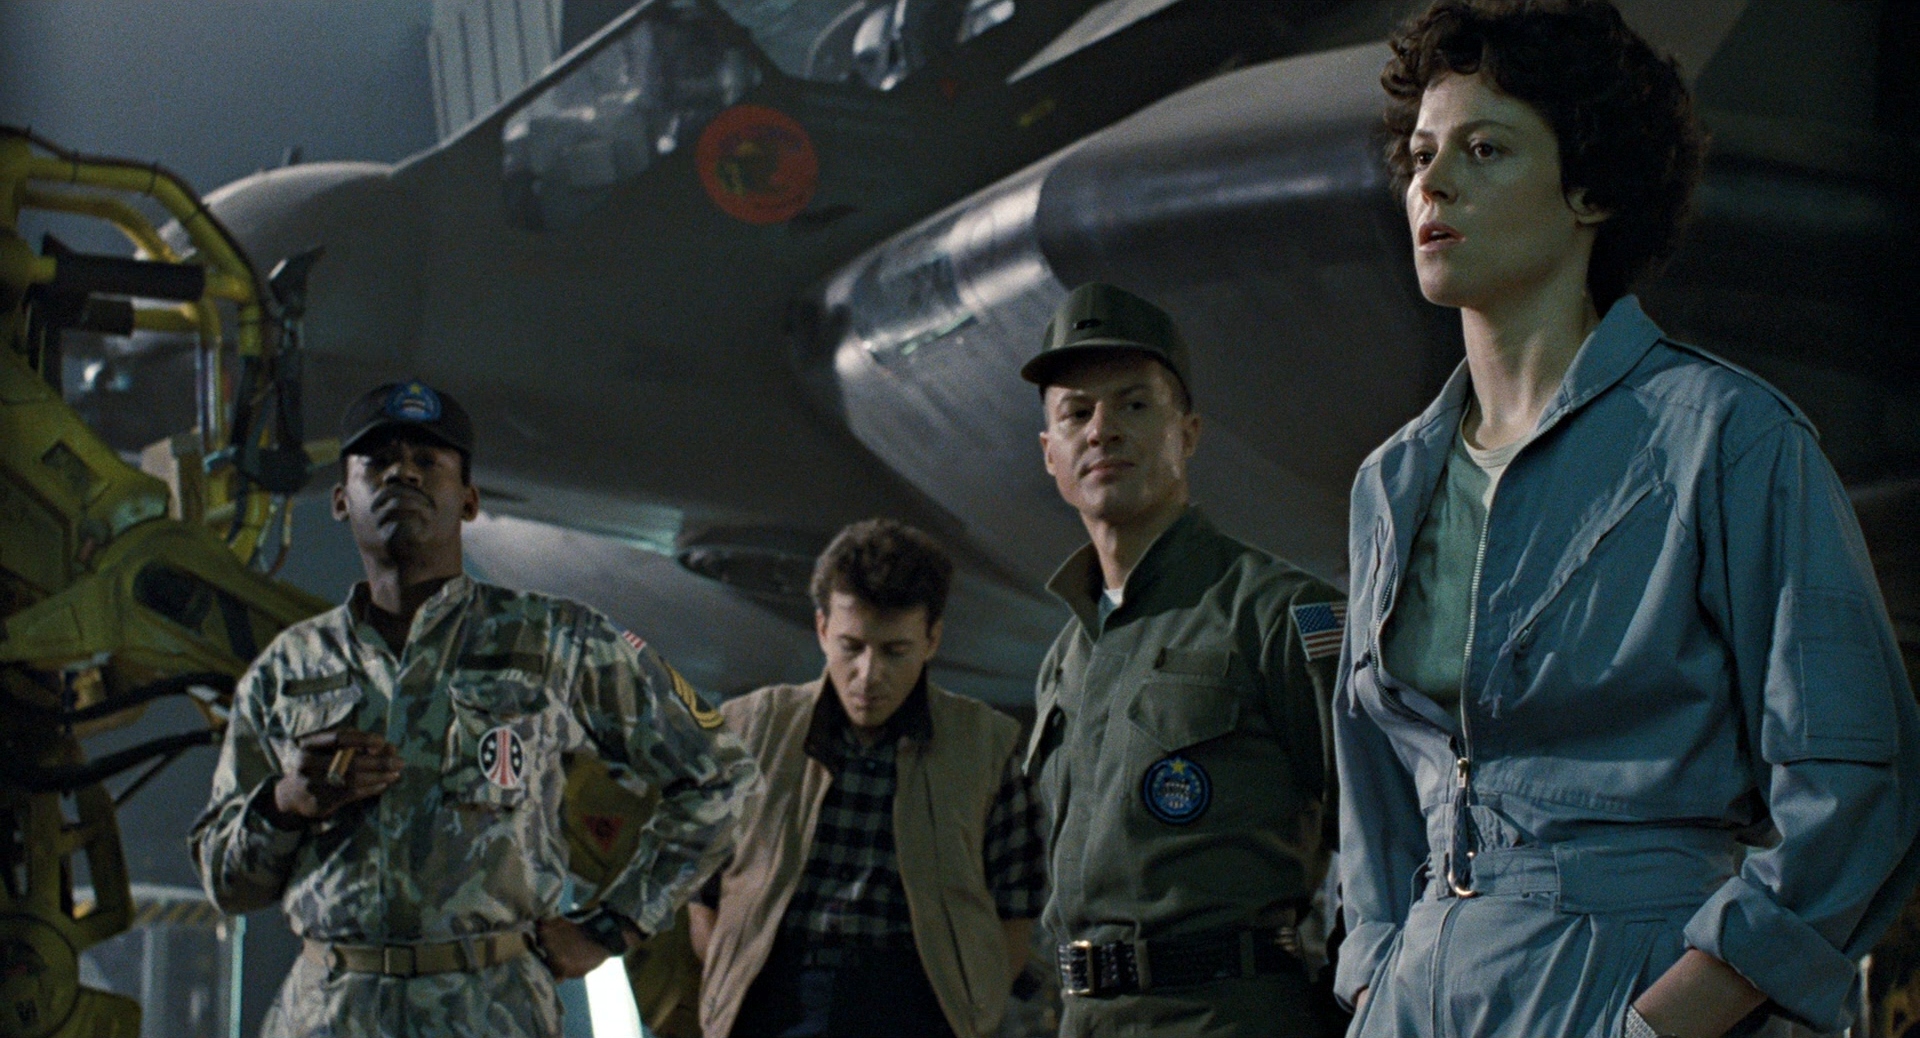 Apone, Burke, and Gorman listen as Ripley briefs the marines in Aliens